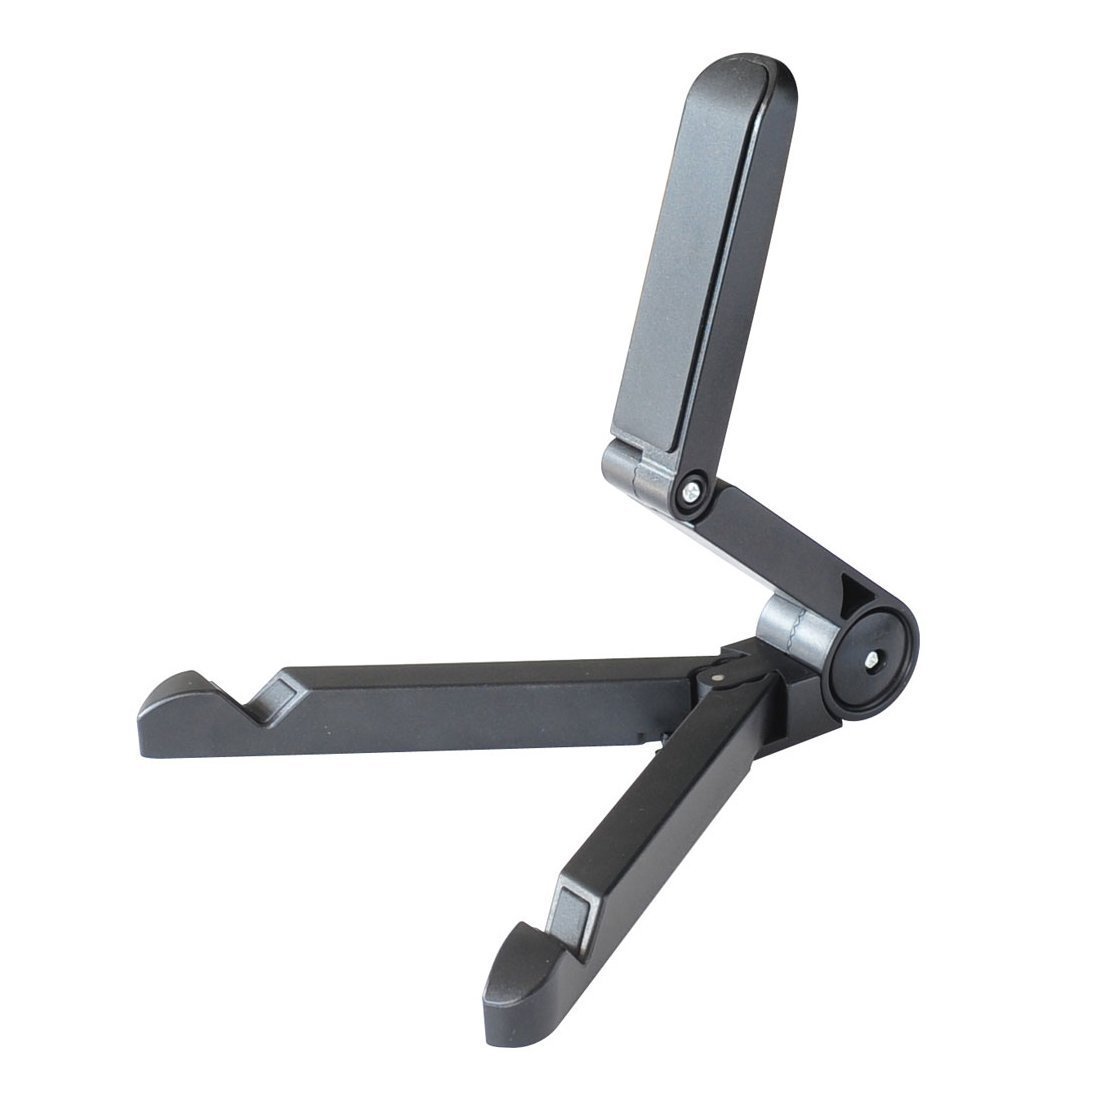 ipad-stand-by-bellstone-review